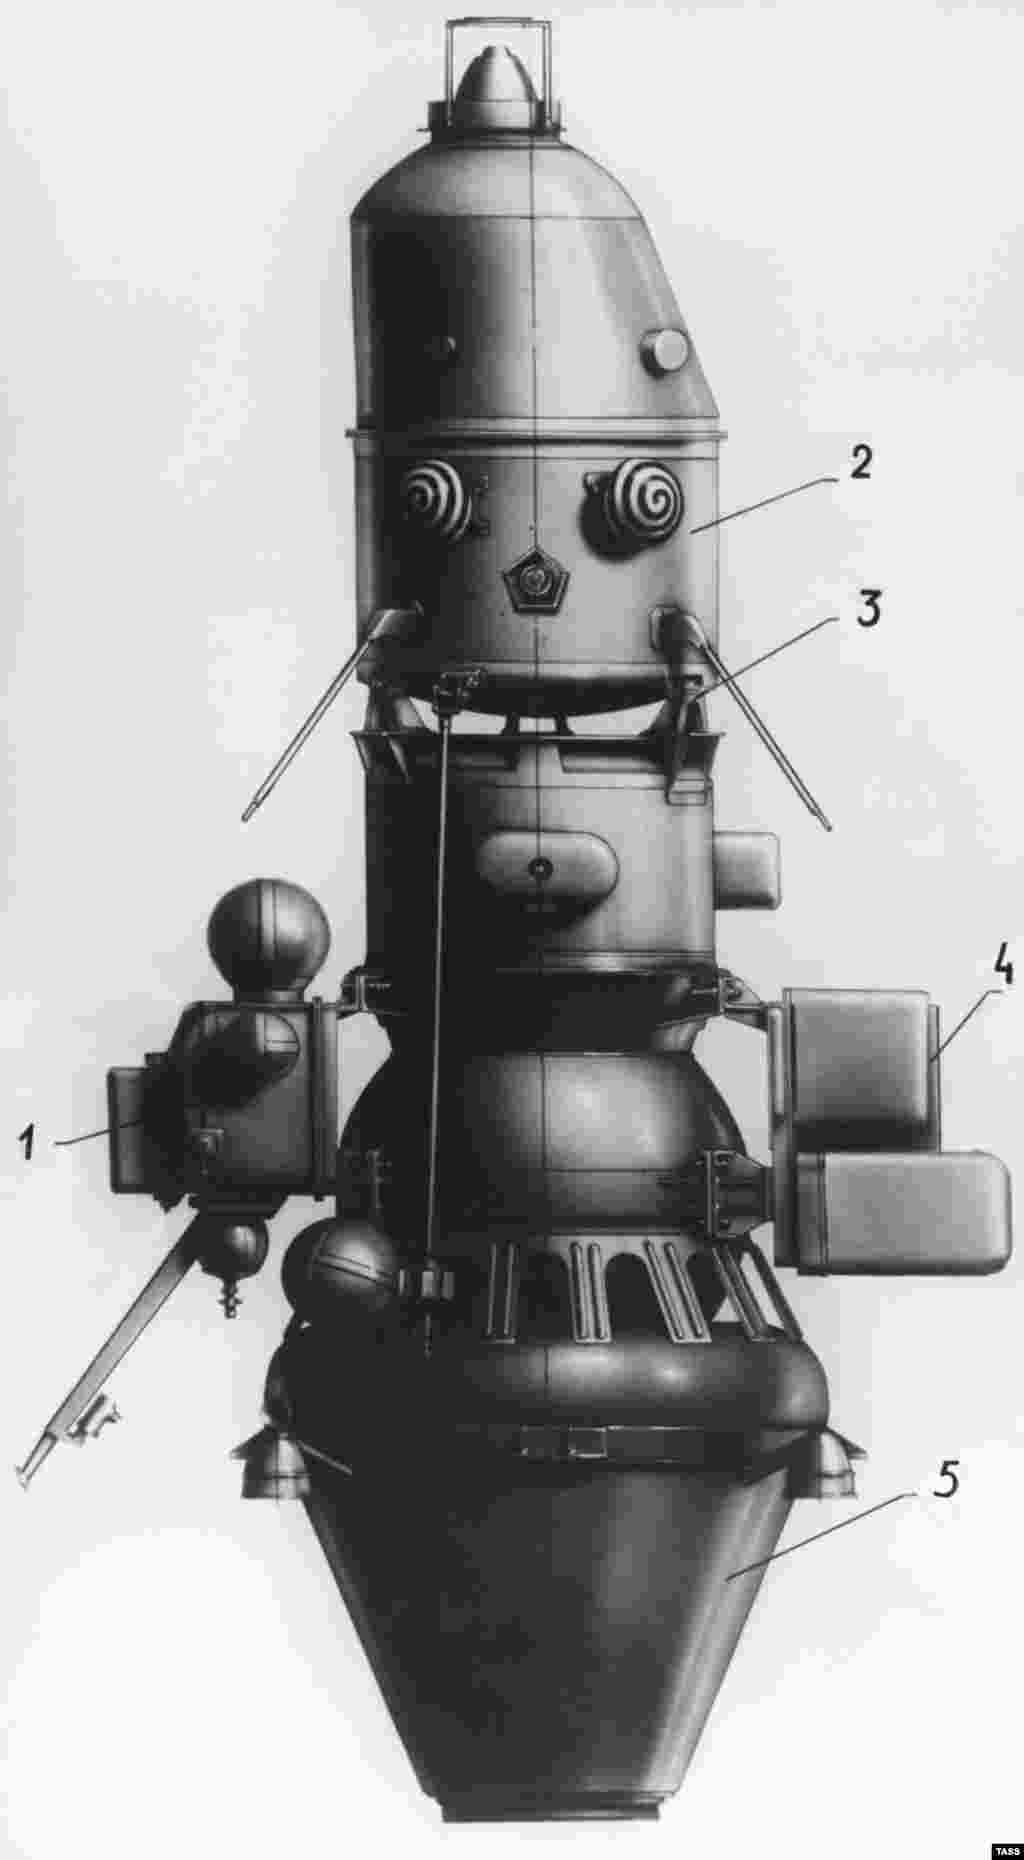 With its horror-clown eyes, the Soviets&rsquo; Luna-10 was a little unlovable. But its mission marked a significant moment during the space race when, in 1966, it became the first craft to orbit the moon.